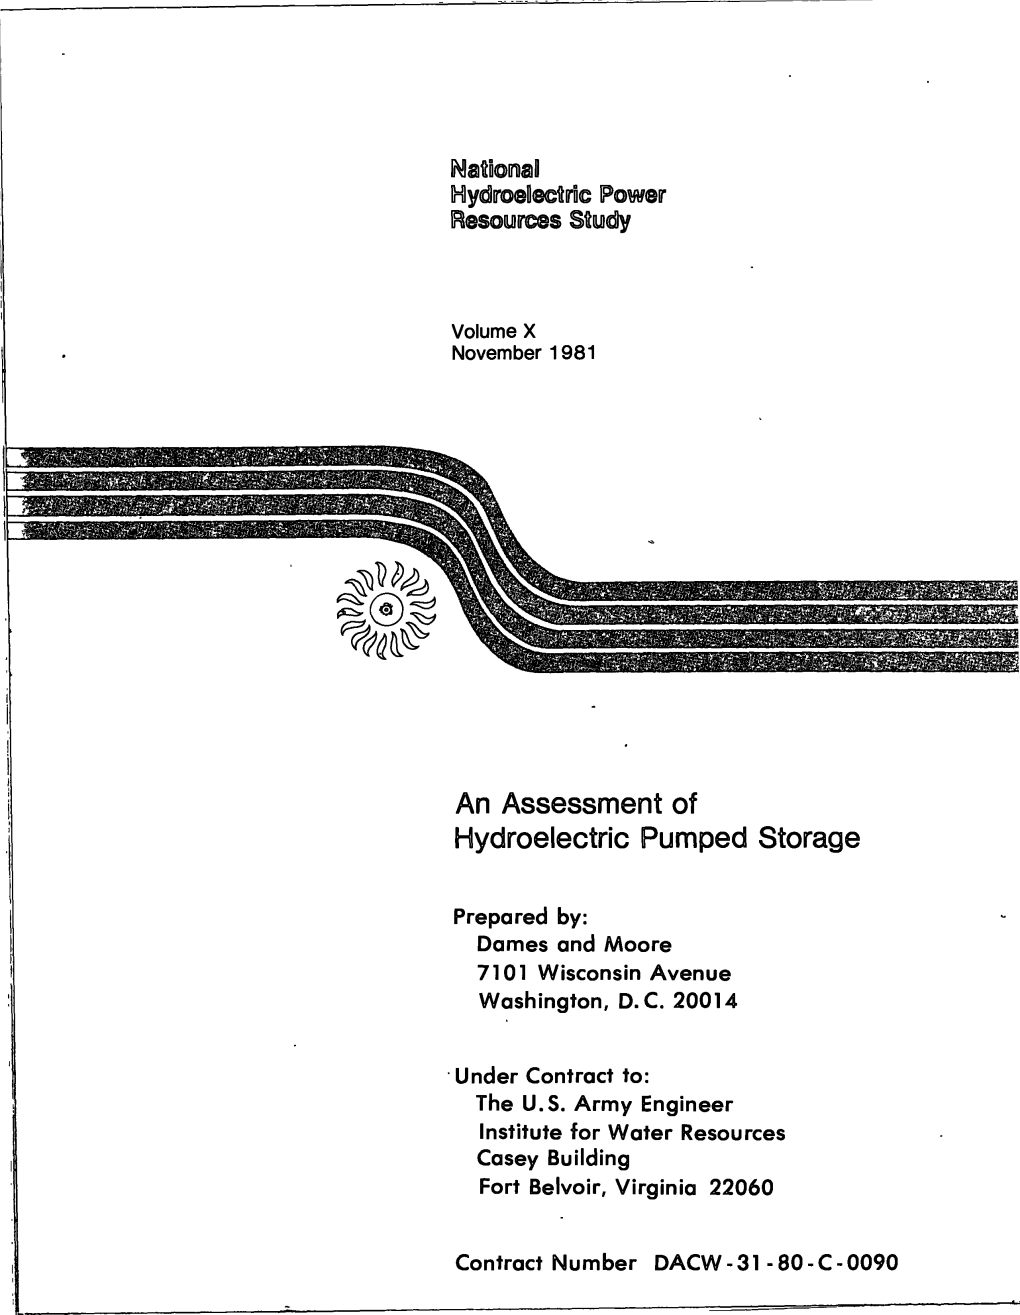 An Assessment of Hydroelectric Pumped Storage